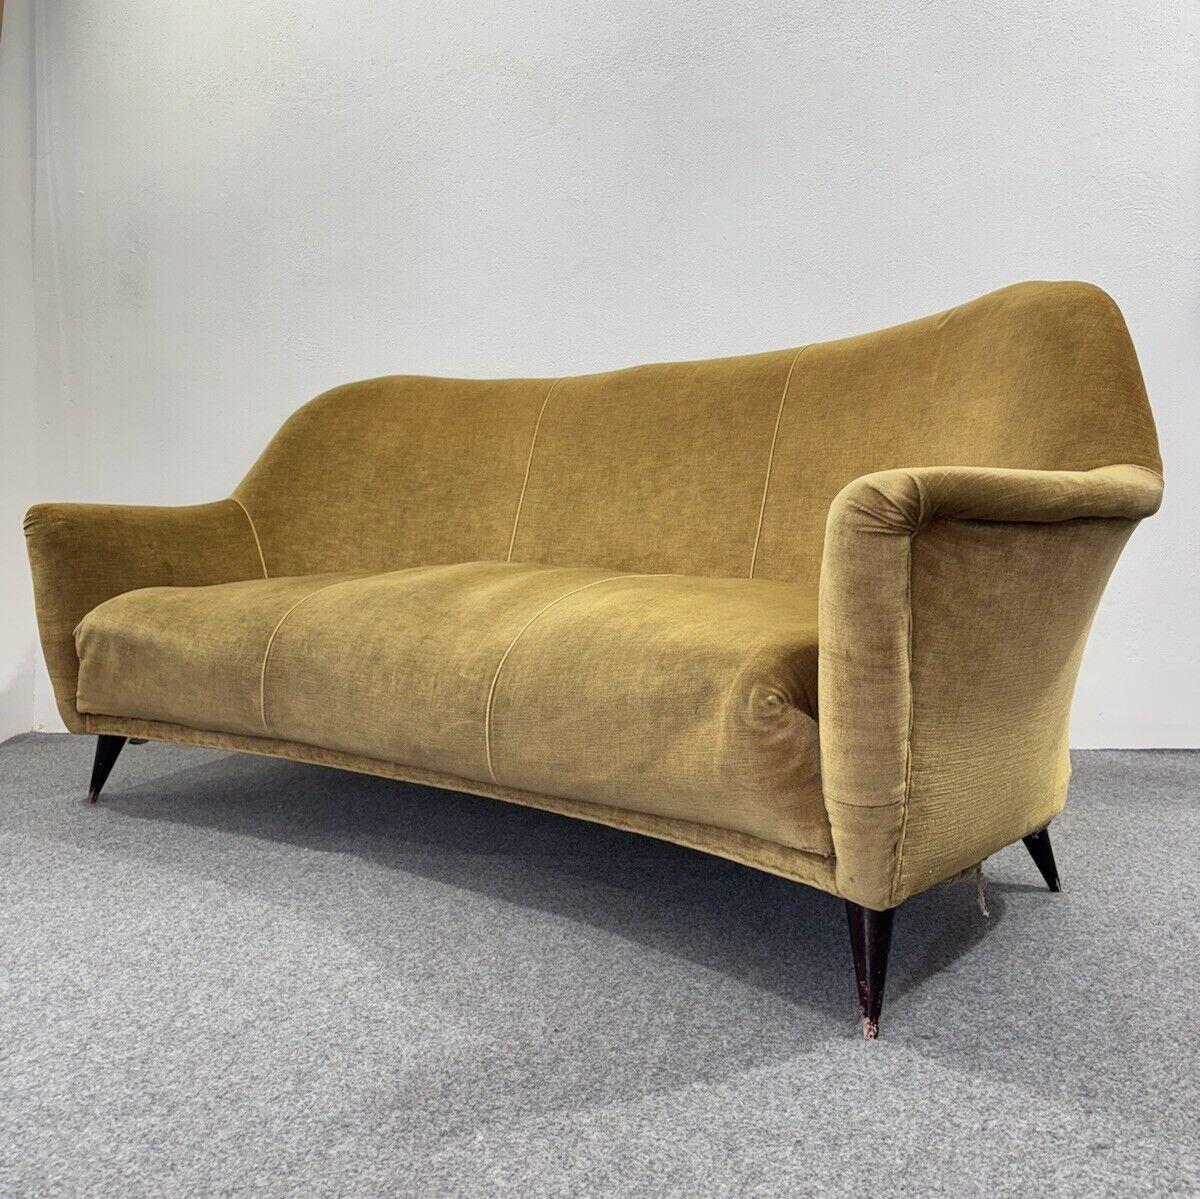 Gio Ponti Home & Garden Sofa Velvet Mid-Century 3 Seater 1950's Modernism.

Entirely carved wooden frame, upholstery in ochre-colored velvet original to the period.

The item is in good conservative condition, there is no major aesthetic or